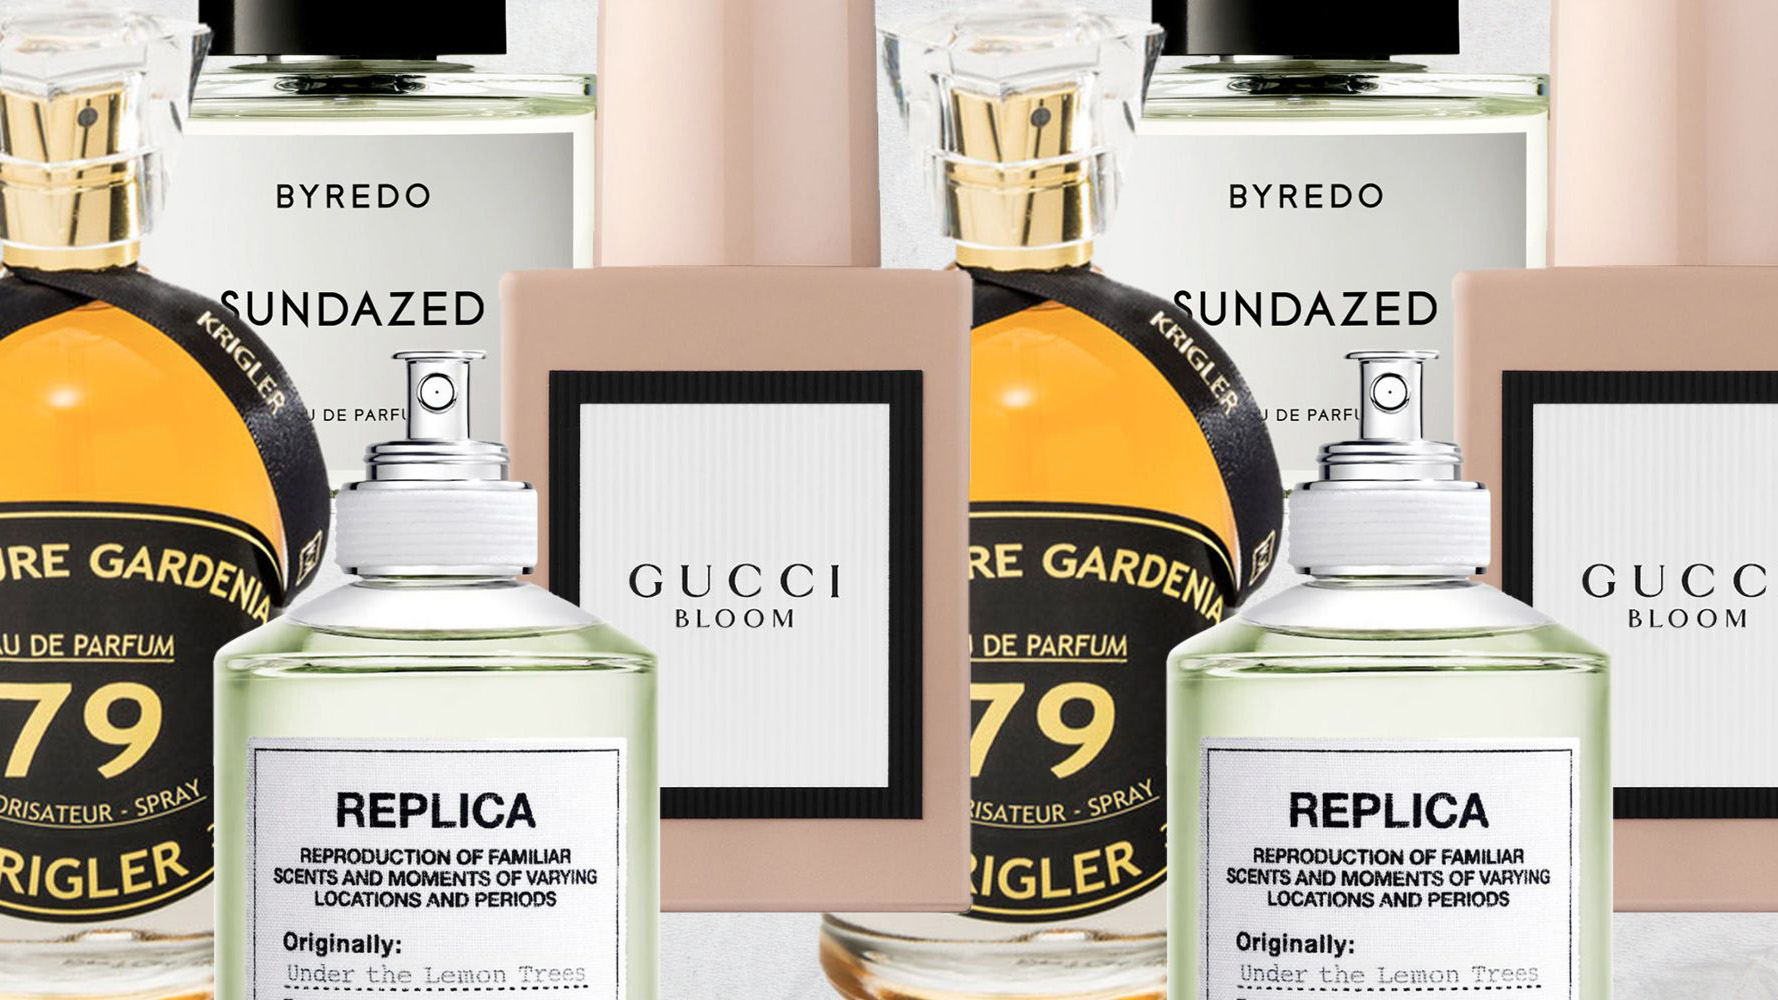 15 Summer Scents You'll Want to Wear All Year Long